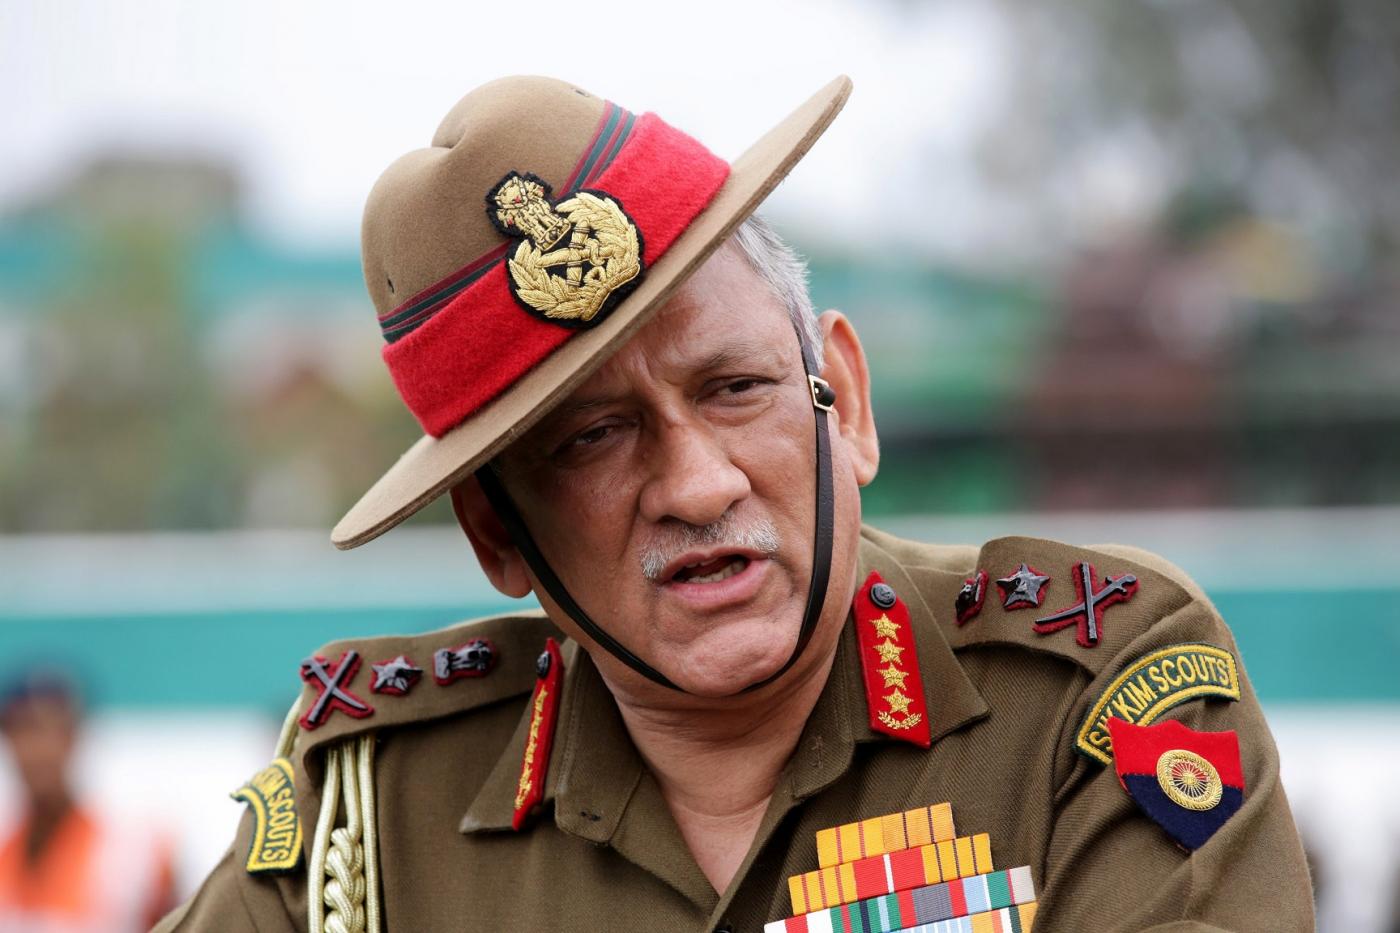 Pathankot: Indian Army chief General Bipin Rawat addresses during 'Year of Disabled Soldiers in Line of Duty' programme at Mamun military station in Punjab's Pathankot on Nov 12, 2018. (Photo: IANS) by .